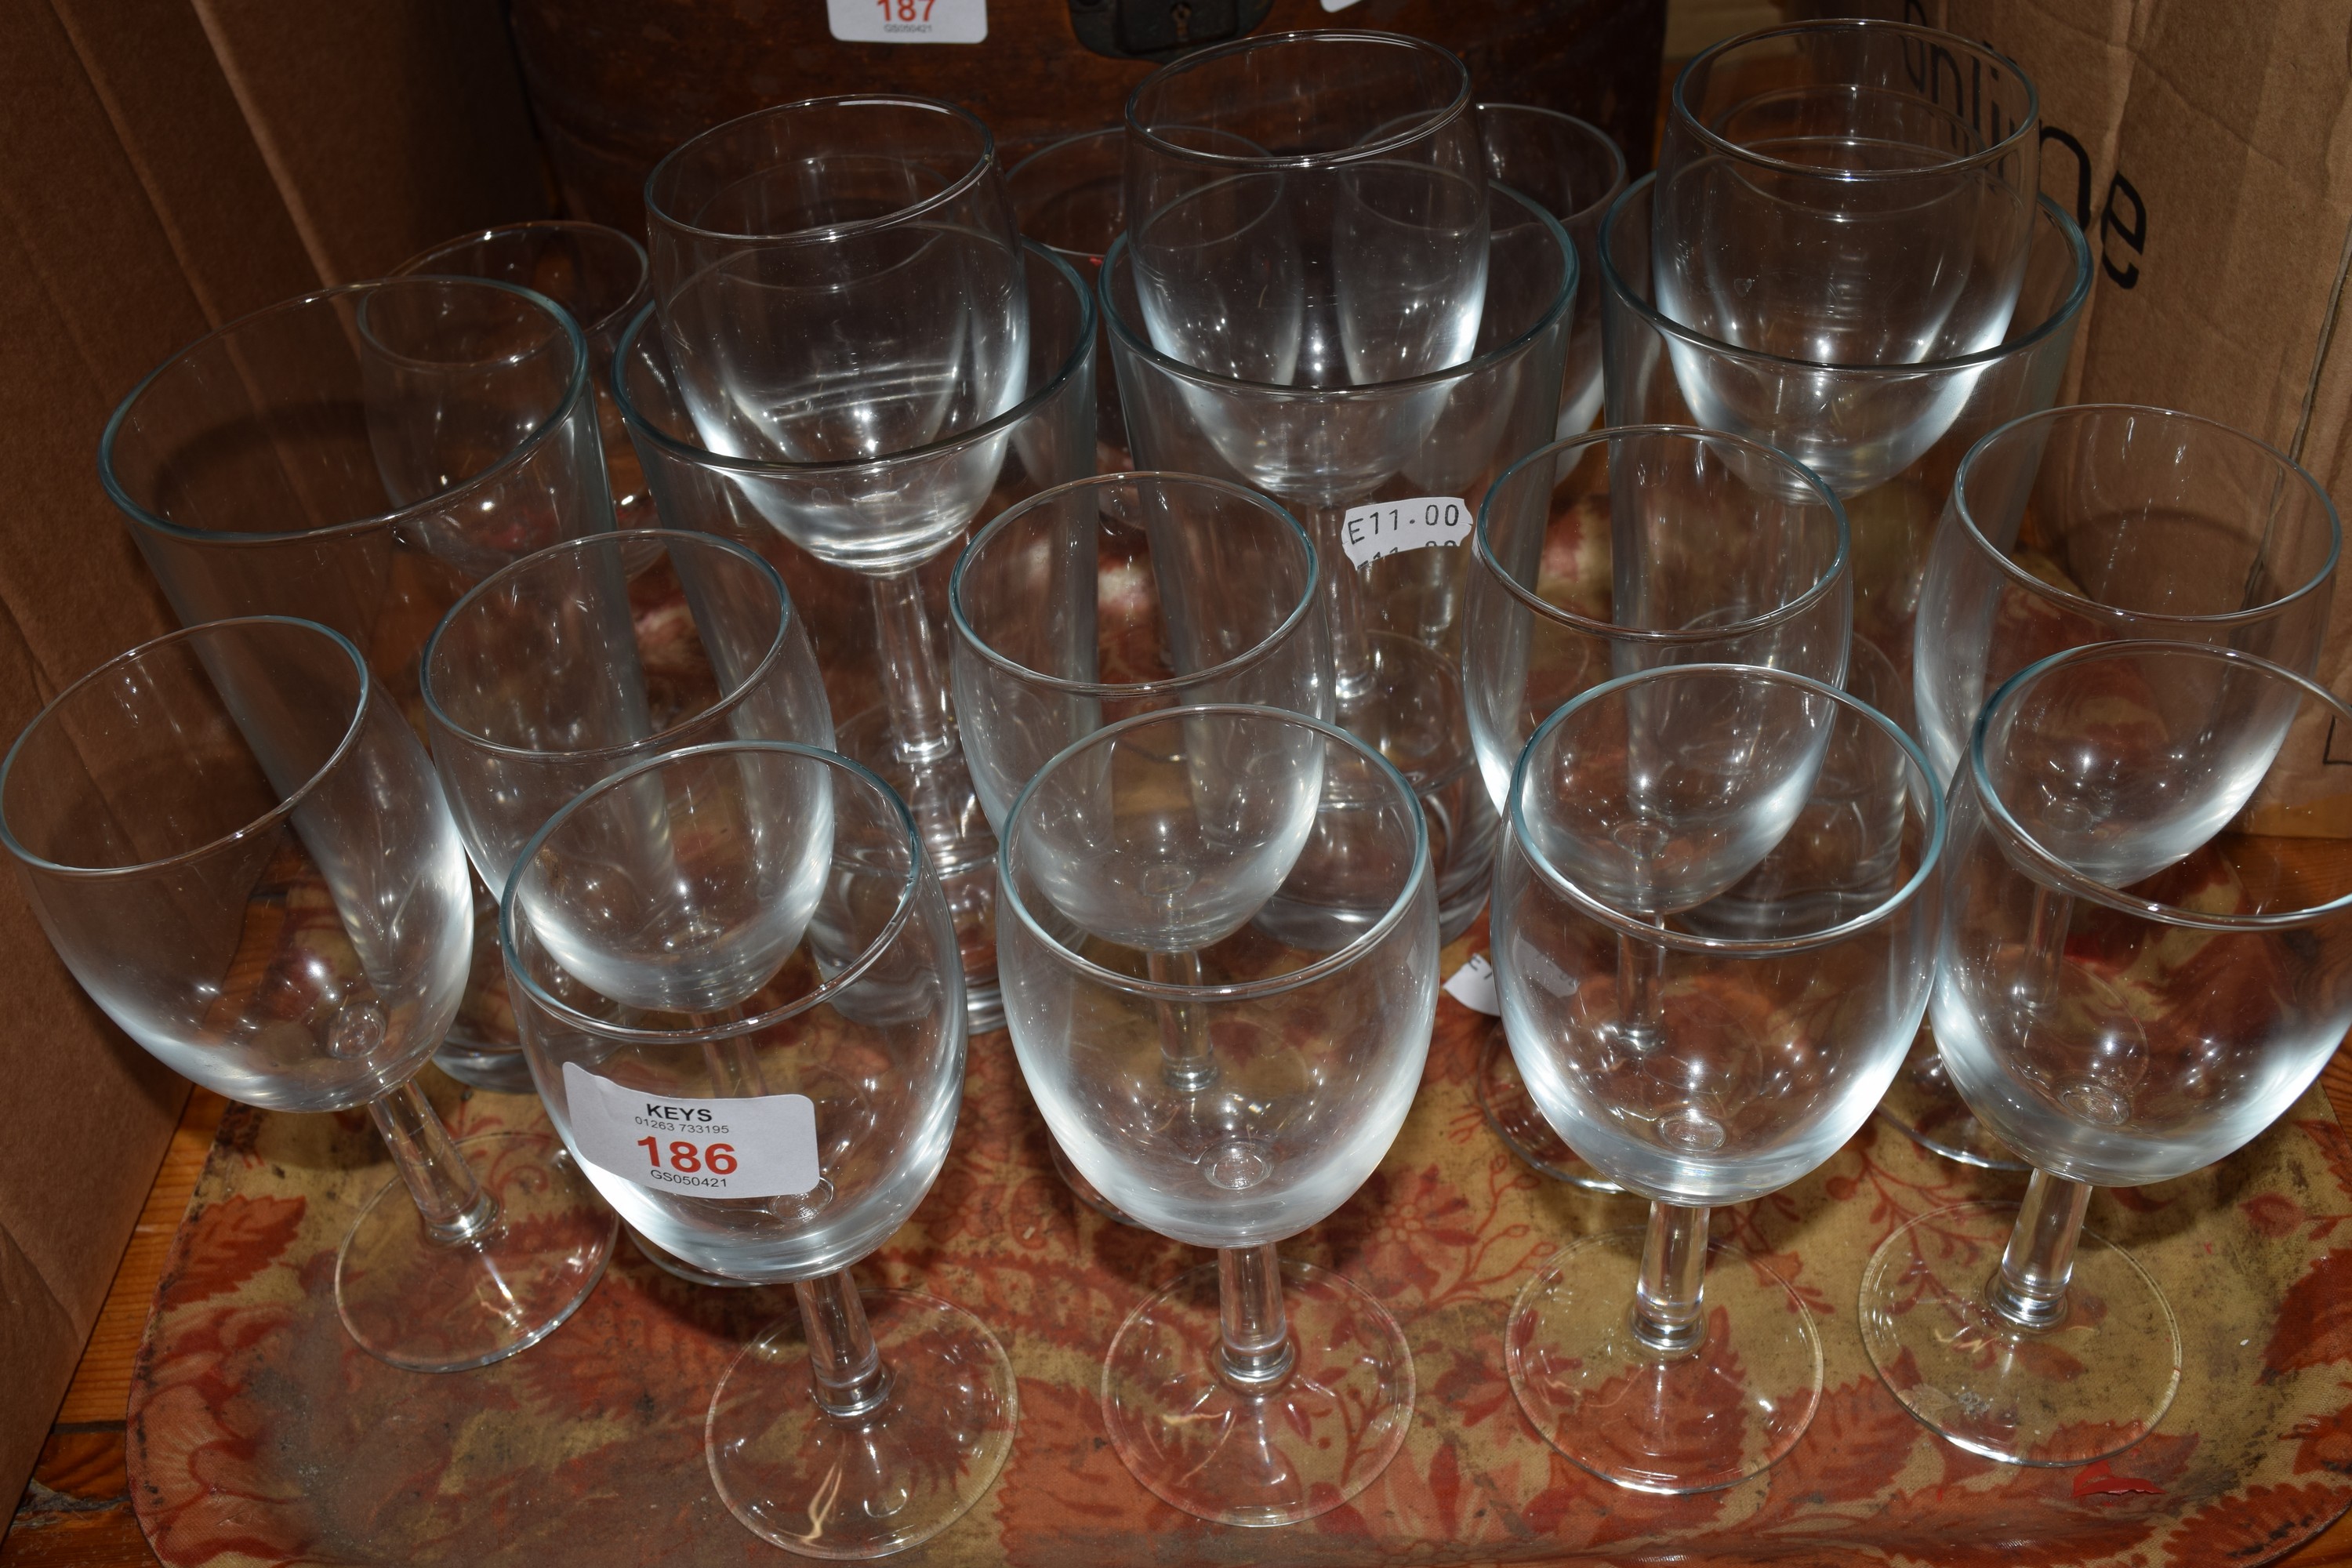 TRAY CONTAINING WINE GLASSES